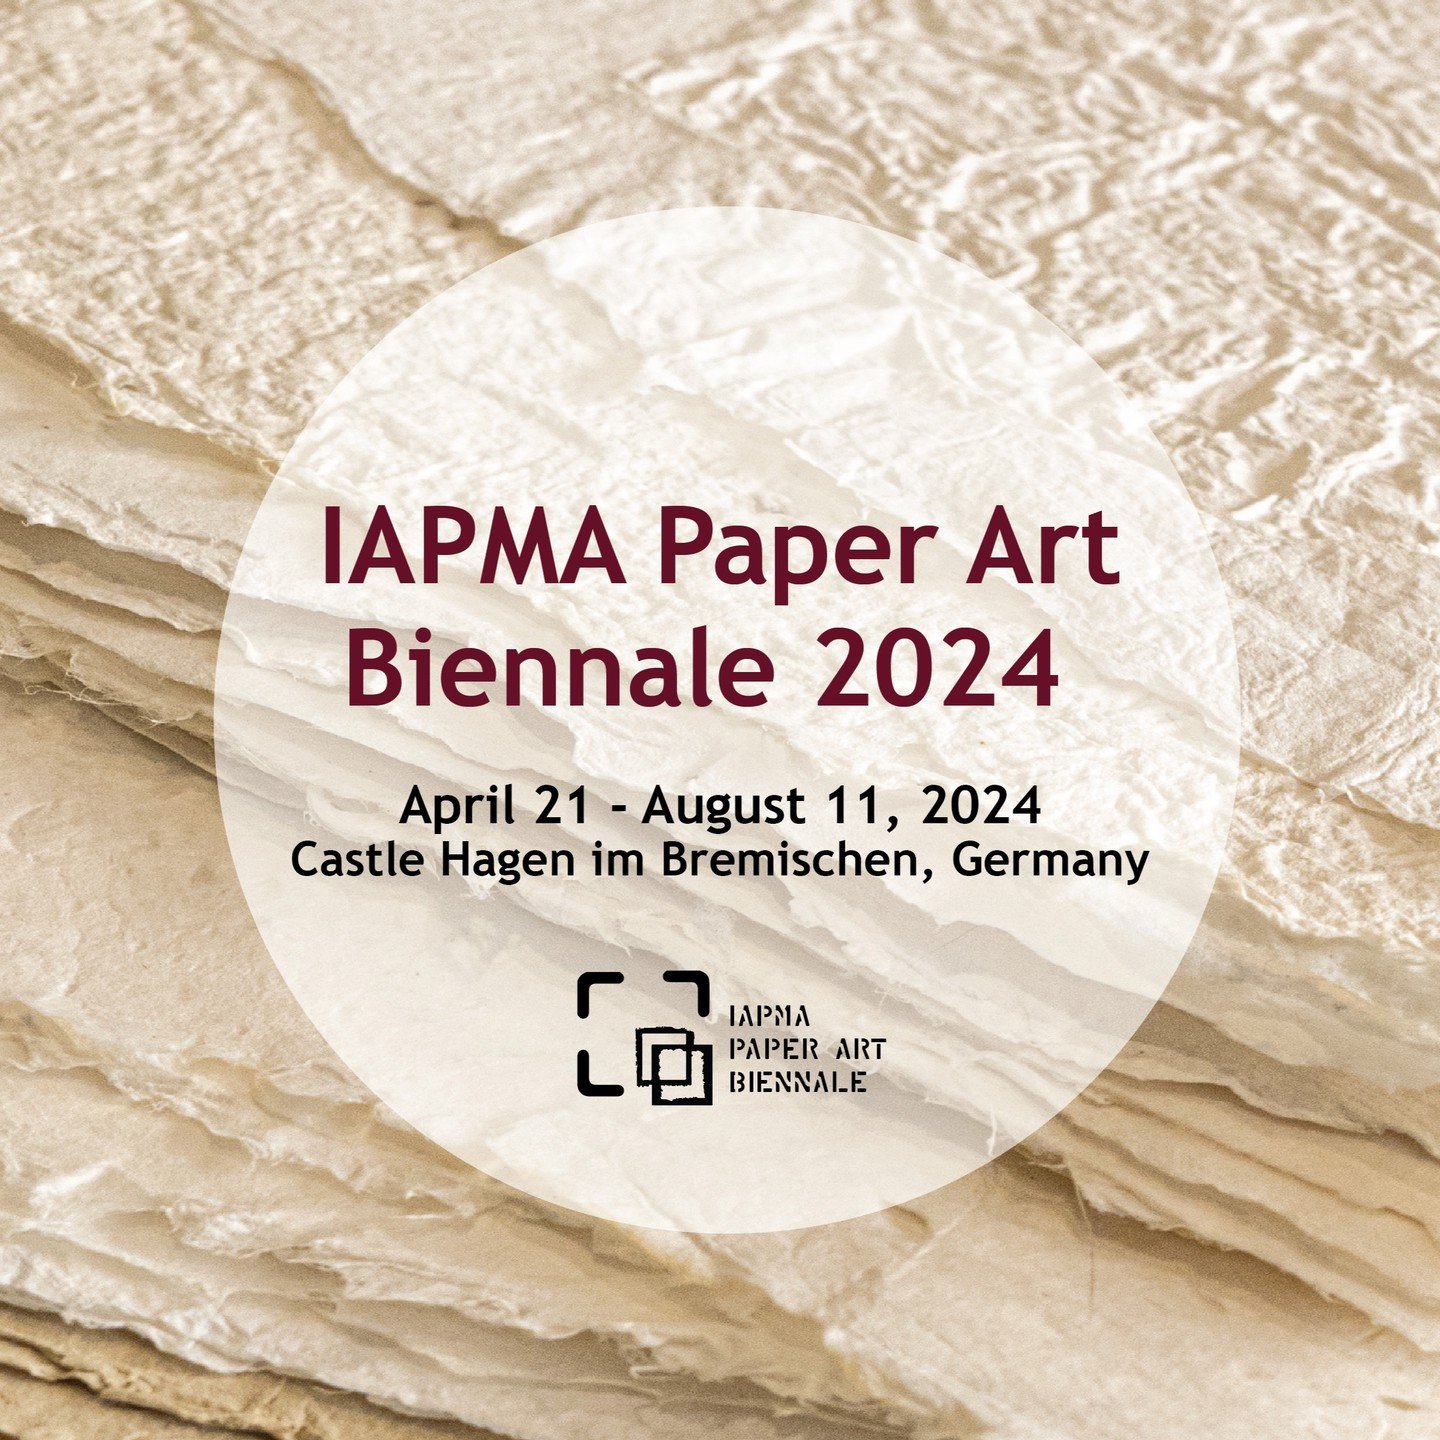 It has been my intense pleasure to be a part of the jury selection for the IAPMA Biennale 2024. The exhibition opens this Sunday. I have been thinking about how much I have grown as an artist been a part of this organization, The International Associ